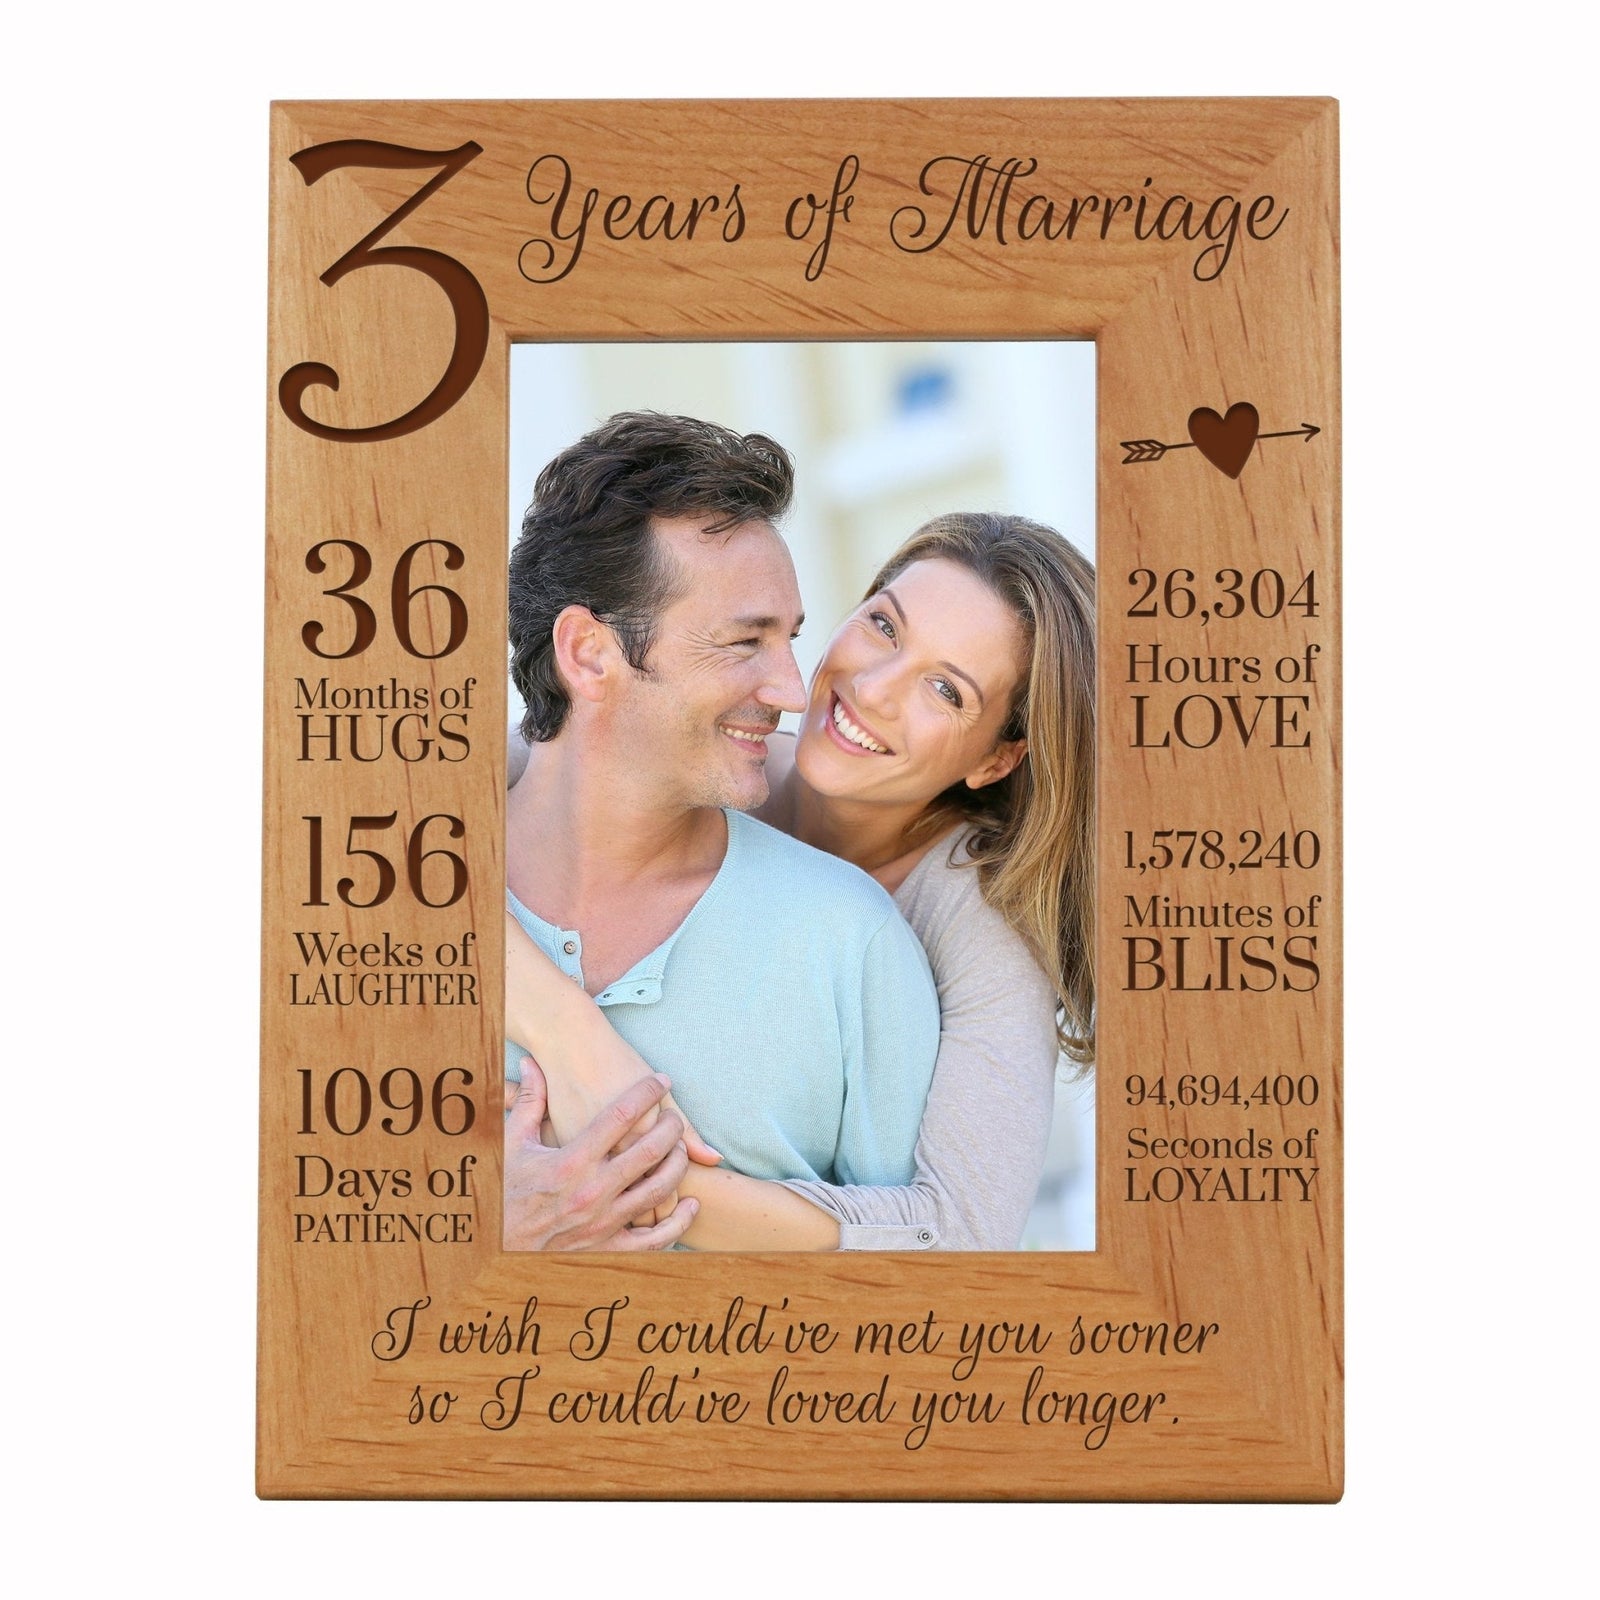 Engraved 3rd Wedding Anniversary Photo Frame Wall Decor Gift for Couples - I Met You Sooner - LifeSong Milestones